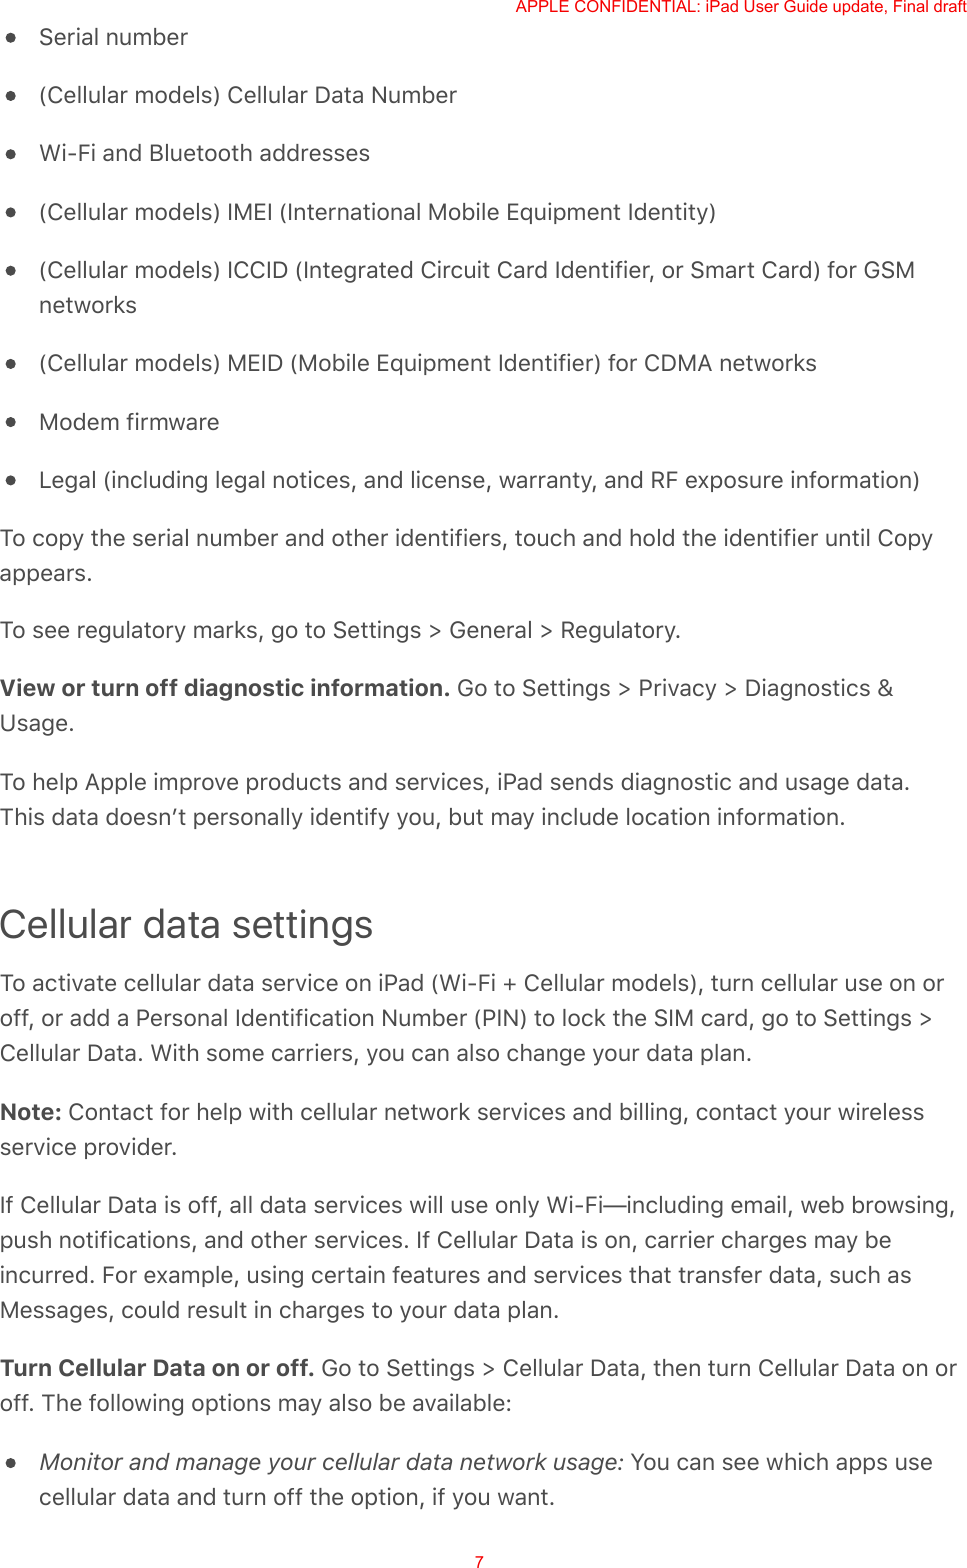 Serial number(Cellular models) Cellular Data NumberWi-Fi and Bluetooth addresses(Cellular models) IMEI (International Mobile Equipment Identity)(Cellular models) ICCID (Integrated Circuit Card Identifier, or Smart Card) for GSMnetworks(Cellular models) MEID (Mobile Equipment Identifier) for CDMA networksModem firmwareLegal (including legal notices, and license, warranty, and RF exposure information)To copy the serial number and other identifiers, touch and hold the identifier until Copyappears.To see regulatory marks, go to Settings &gt; General &gt; Regulatory.View or turn off diagnostic information. Go to Settings &gt; Privacy &gt; Diagnostics &amp;Usage.To help Apple improve products and services, iPad sends diagnostic and usage data.This data doesnʼt personally identify you, but may include location information.Cellular data settingsTo activate cellular data service on iPad (Wi-Fi + Cellular models), turn cellular use on oroff, or add a Personal Identification Number (PIN) to lock the SIM card, go to Settings &gt;Cellular Data. With some carriers, you can also change your data plan.Note: Contact for help with cellular network services and billing, contact your wirelessservice provider.If Cellular Data is off, all data services will use only Wi-Fi—including email, web browsing,push notifications, and other services. If Cellular Data is on, carrier charges may beincurred. For example, using certain features and services that transfer data, such asMessages, could result in charges to your data plan.Turn Cellular Data on or off. Go to Settings &gt; Cellular Data, then turn Cellular Data on oroff. The following options may also be available:Monitor and manage your cellular data network usage: You can see which apps usecellular data and turn off the option, if you want.APPLE CONFIDENTIAL: iPad User Guide update, Final draft7